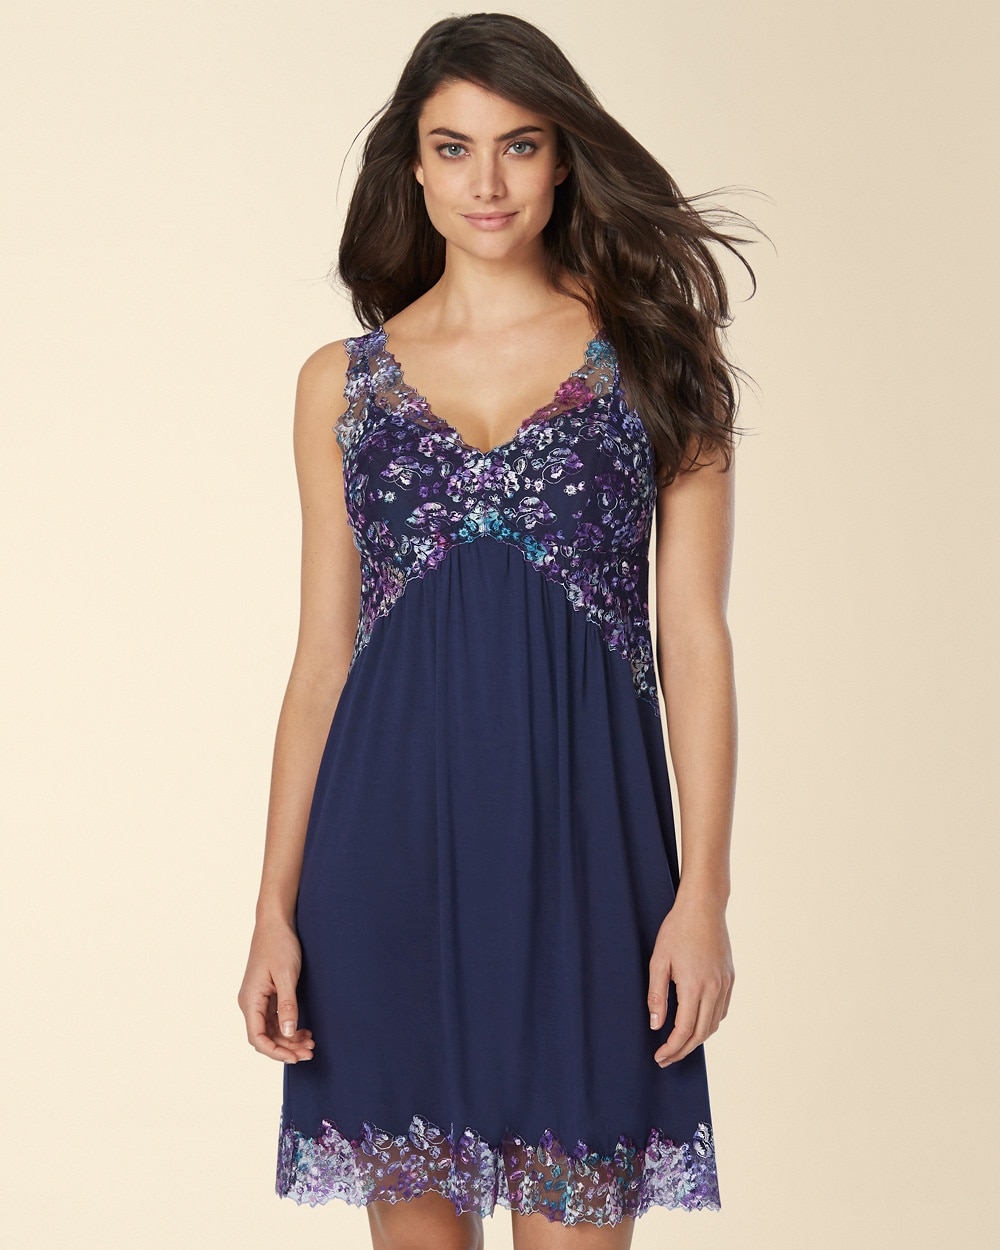 Limited Edition Endearing Lace Sleep Chemise Navy